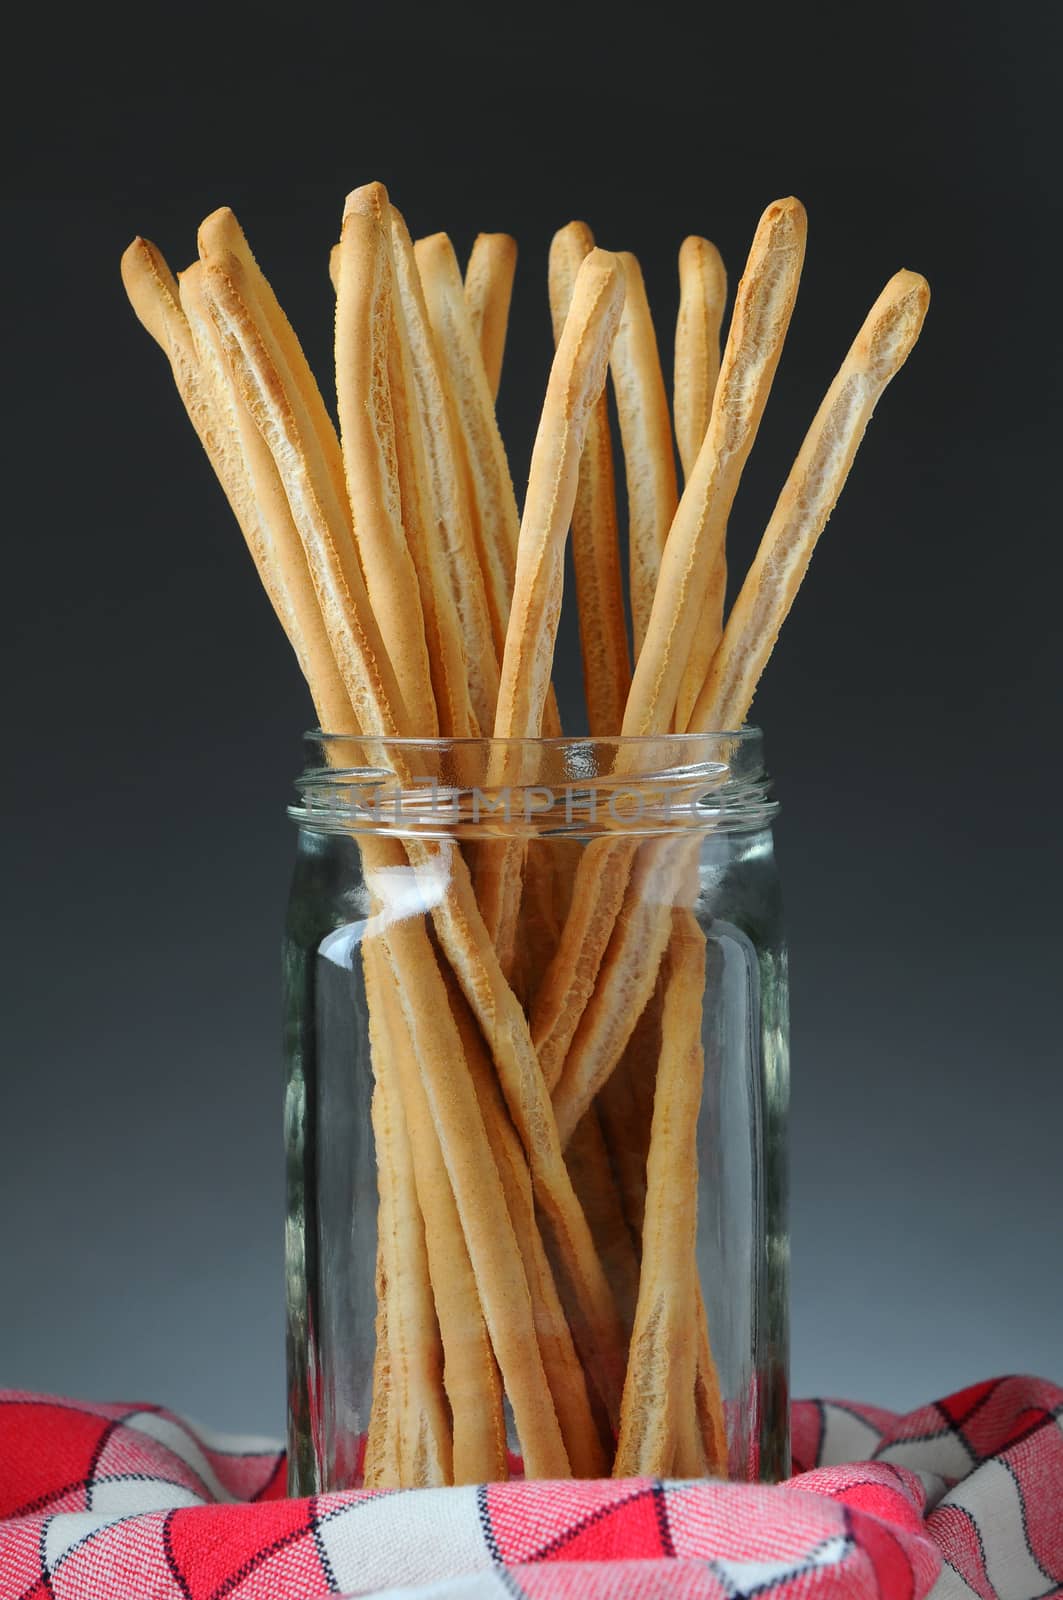 Closeup of a jar full of bread sticks on a checkered napkin with a light to dark gray background.